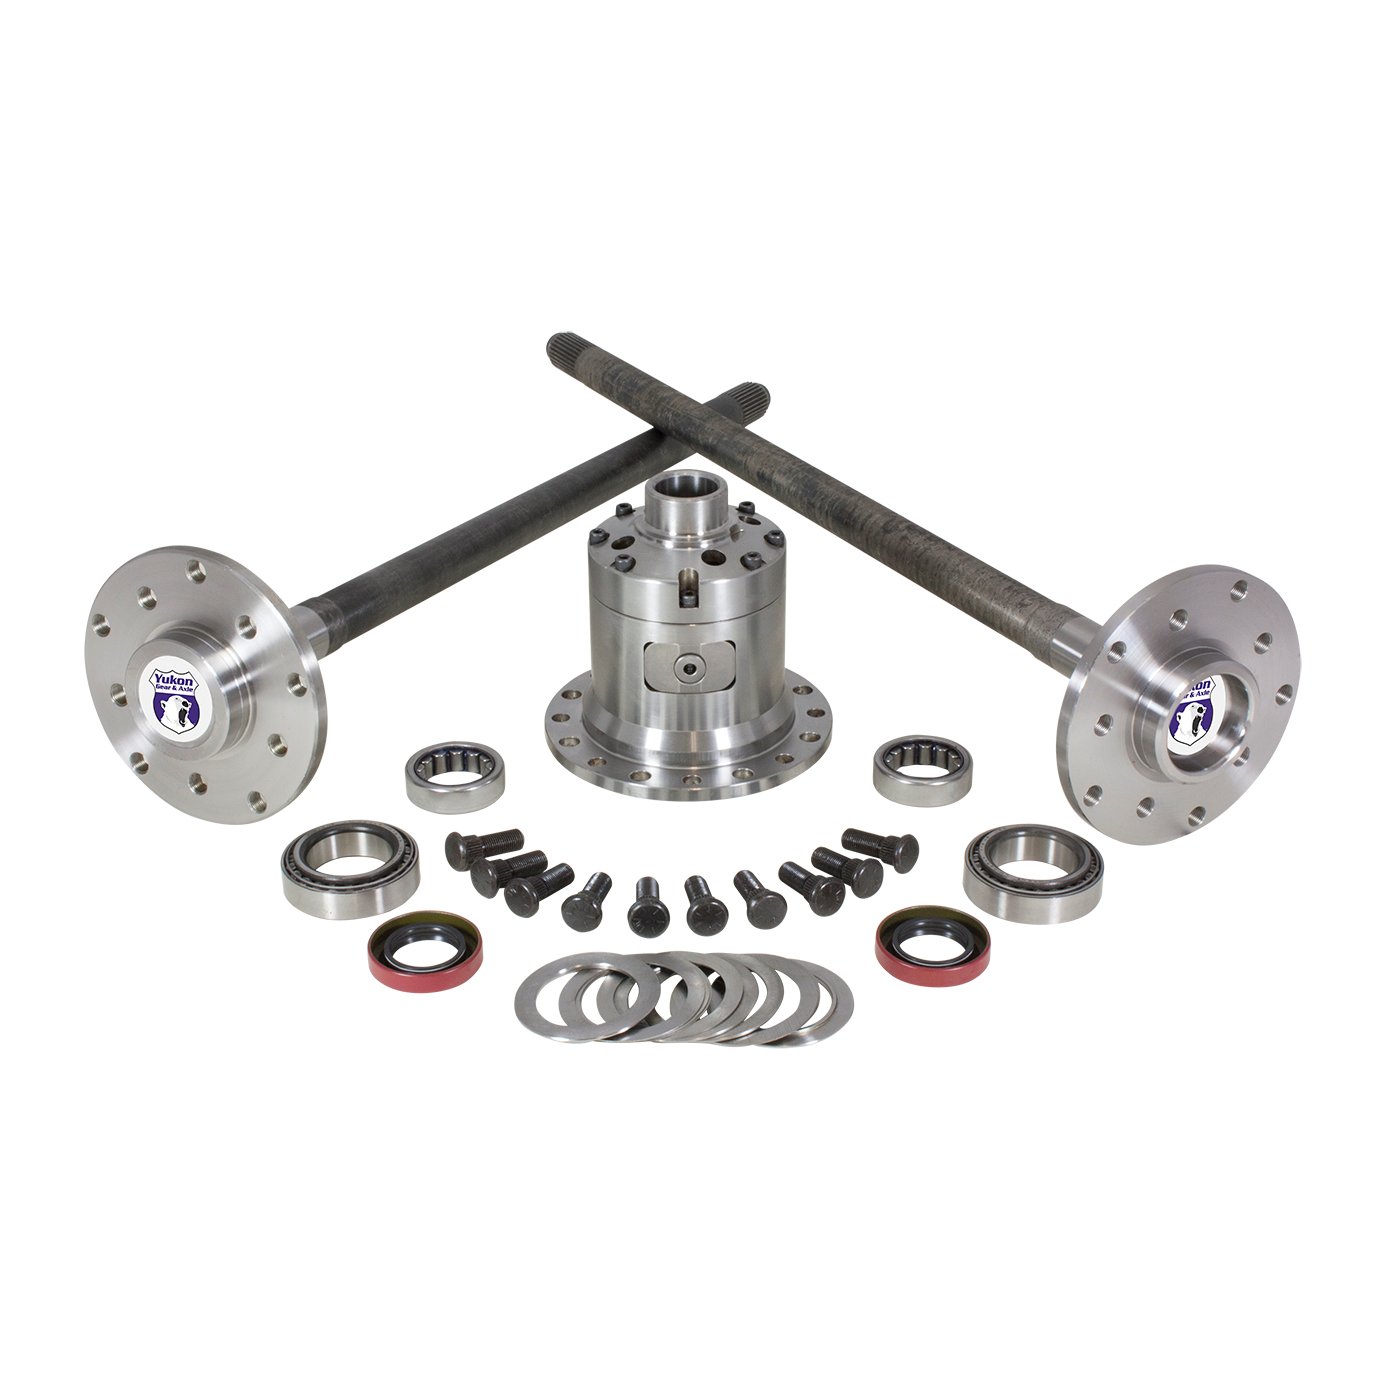 Ultimate 35 Axle Kit For C/Clip Axles With Grizzly Locker